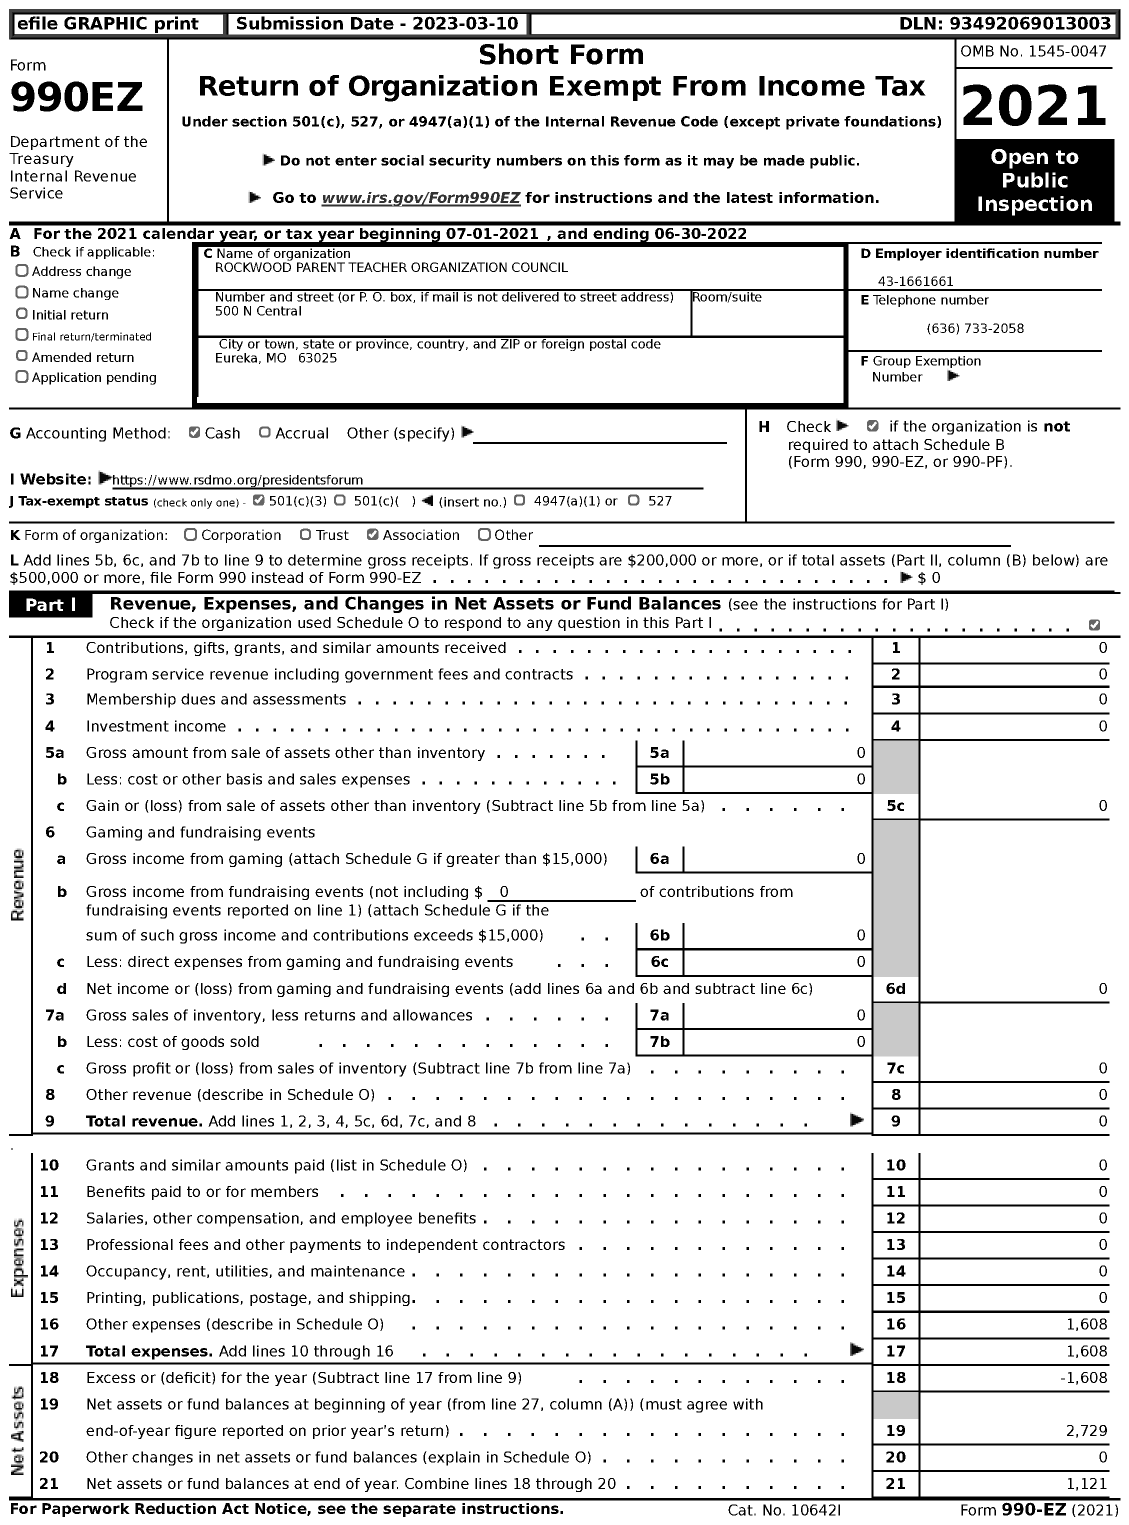 Image of first page of 2021 Form 990EZ for Rockwood Parent Teacher Organization Council / Presidents Forum